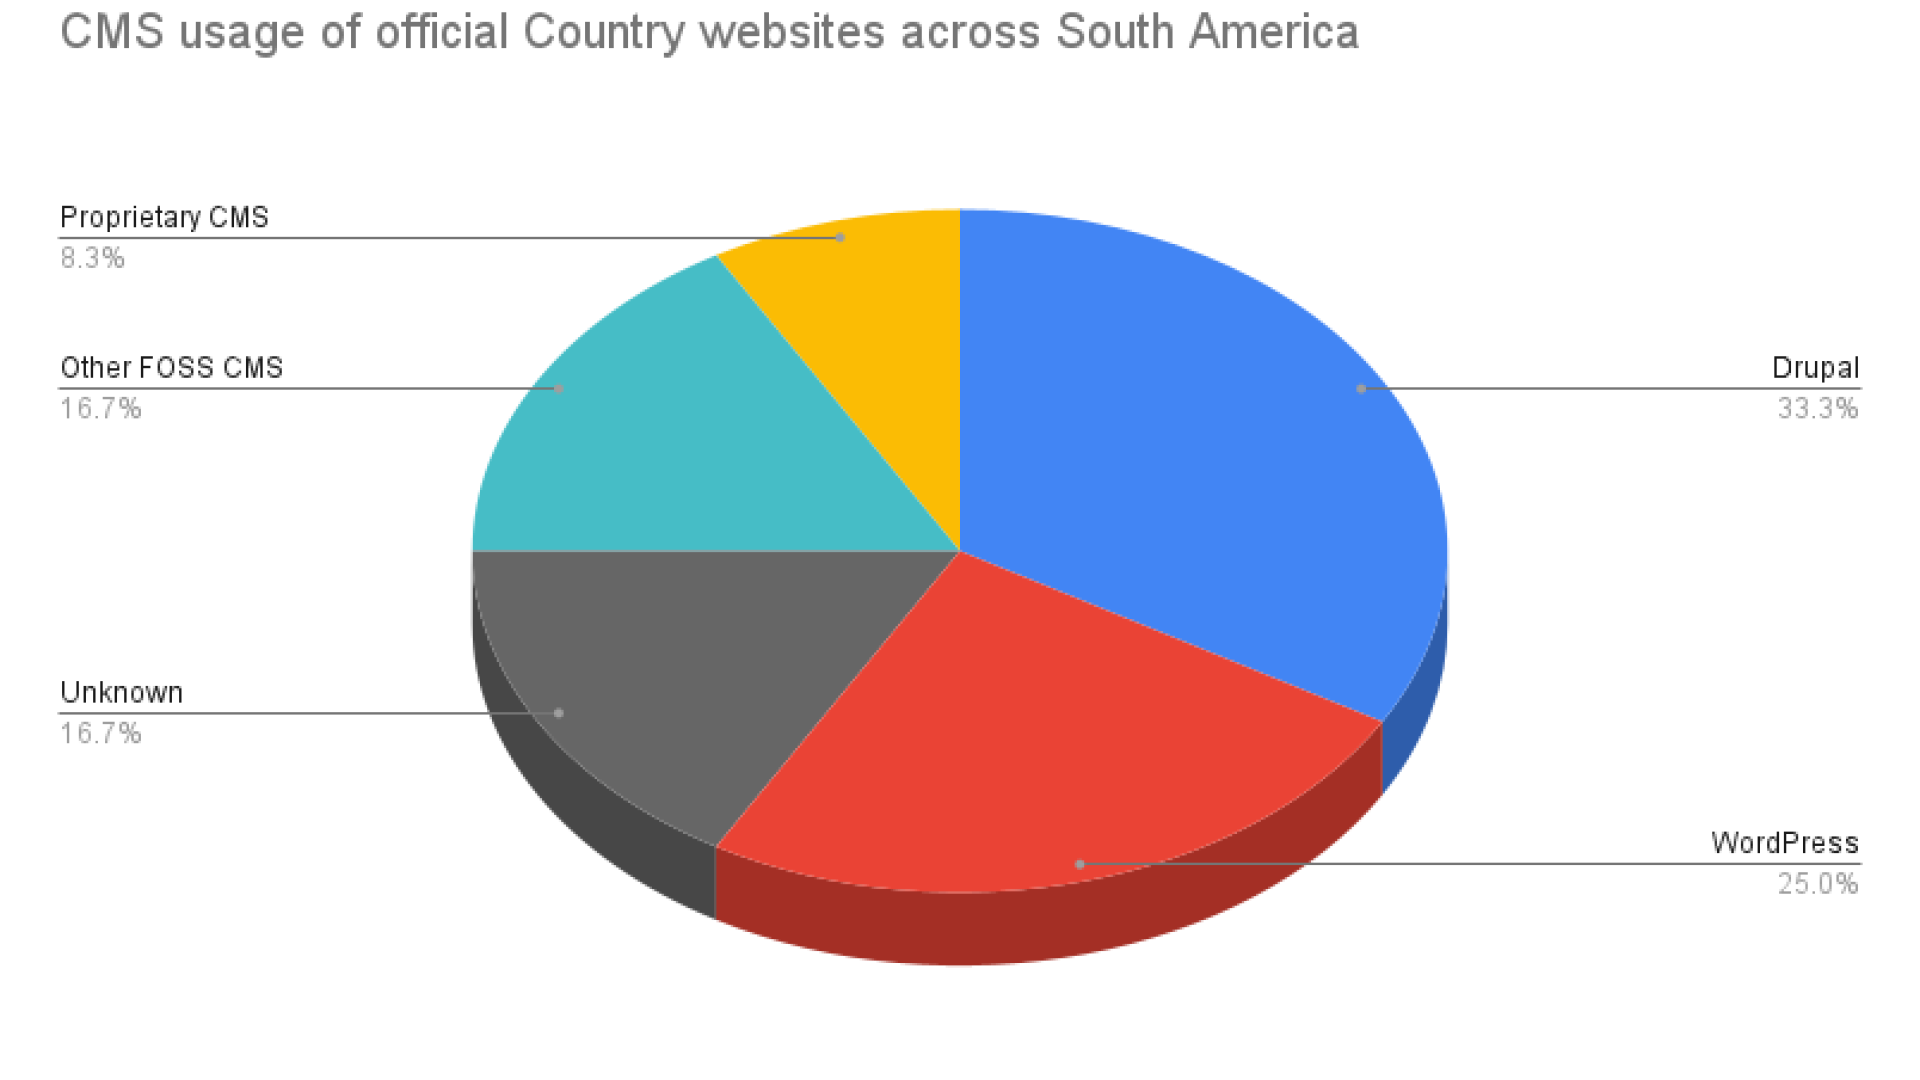 CMS usage of official country websites across South America